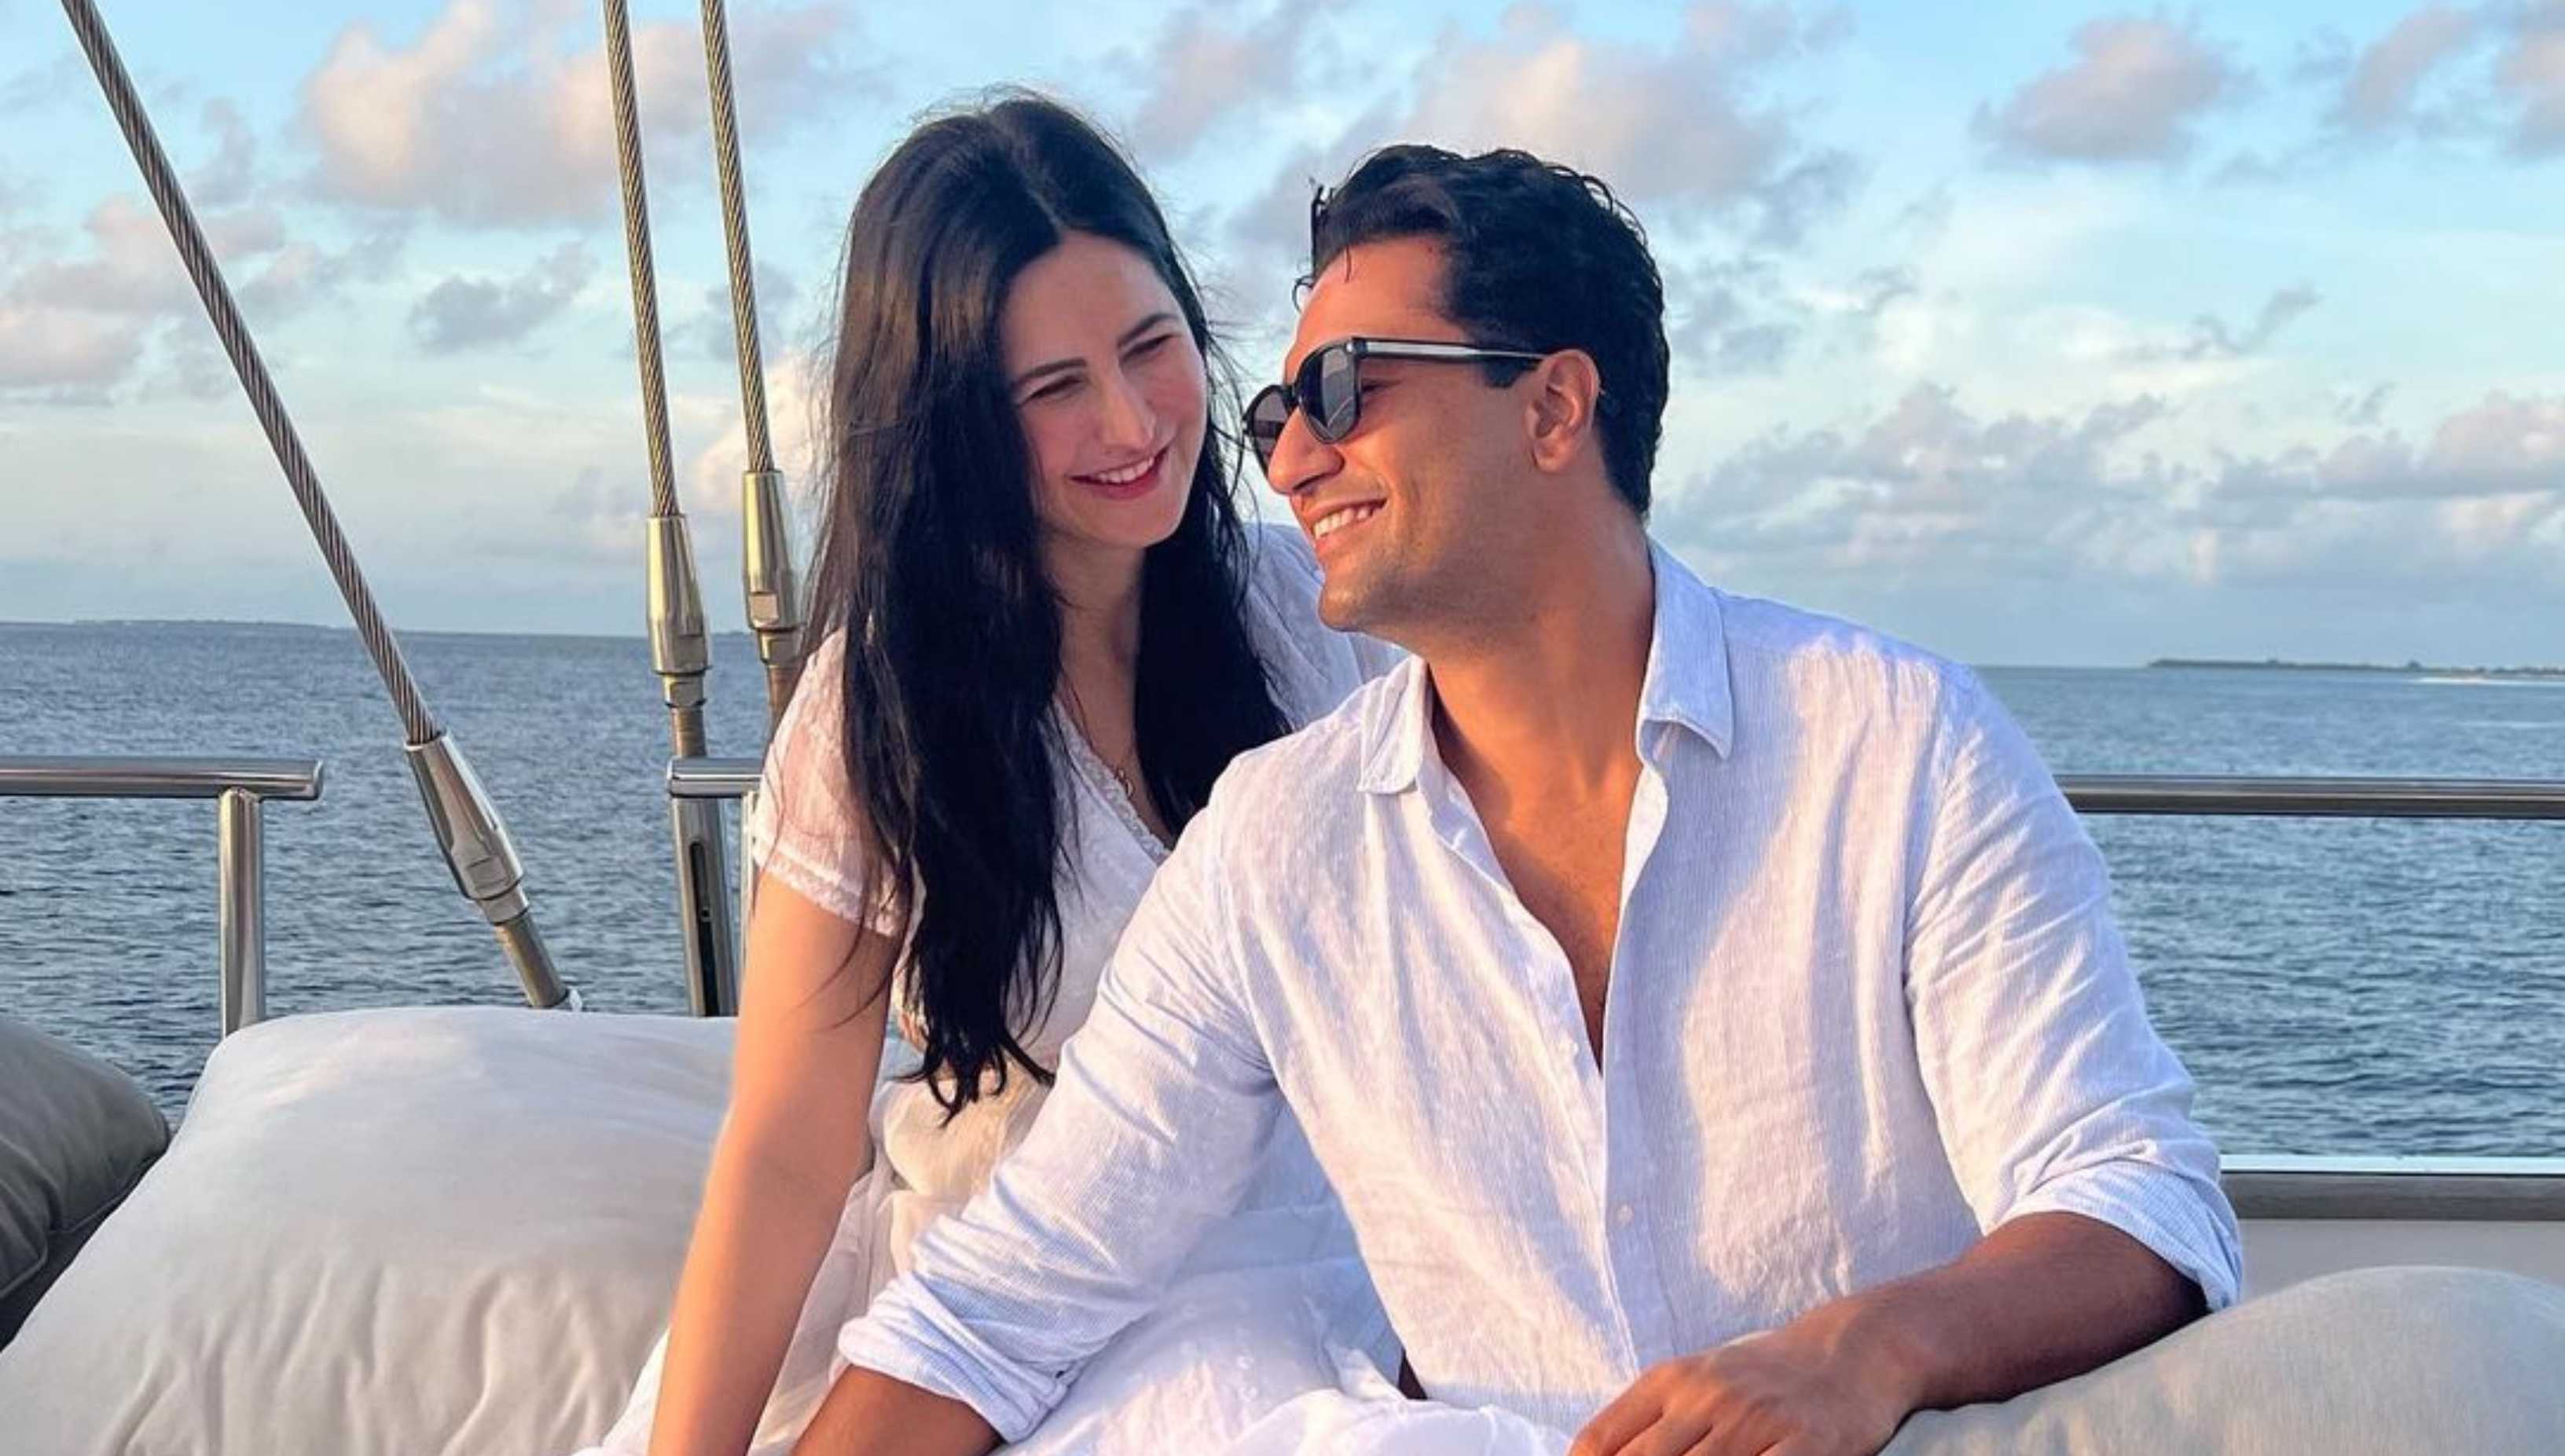 ‘Katrina's basic’: Vicky Kaushal decodes his wife’s sense of style; reveals why she doesn't give him fashion advice